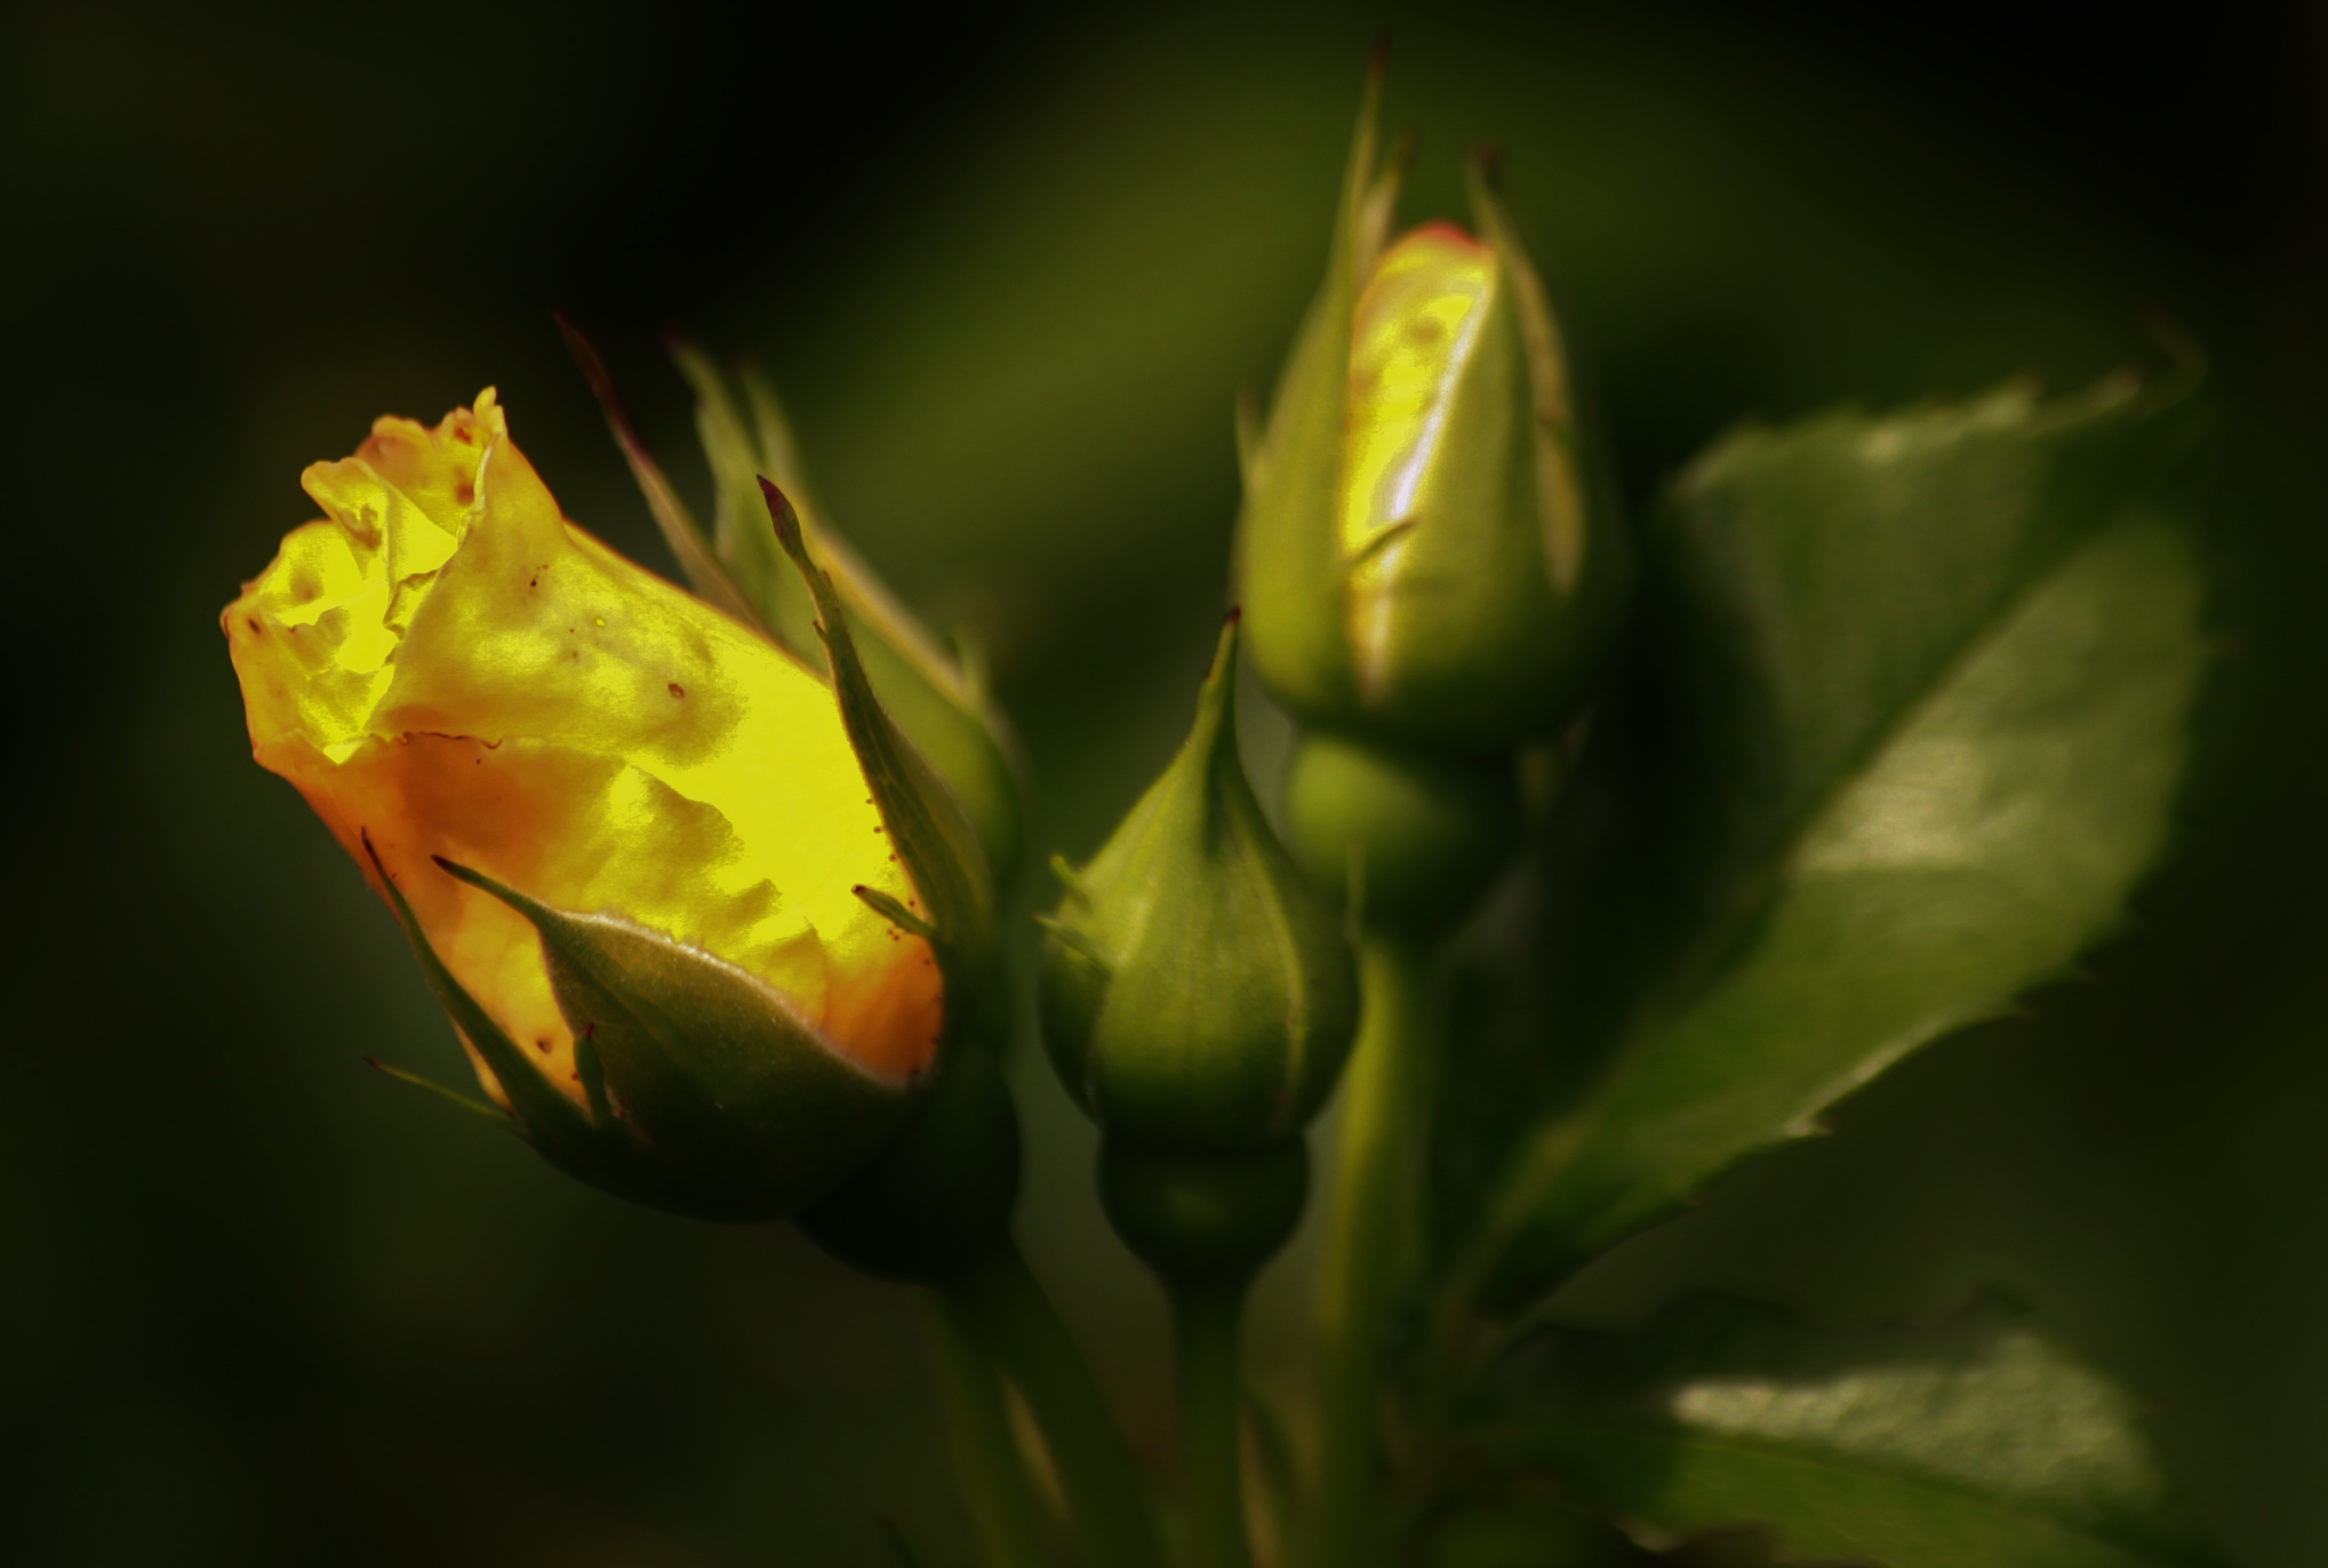 yellow rose bud about to bloom on close up photography